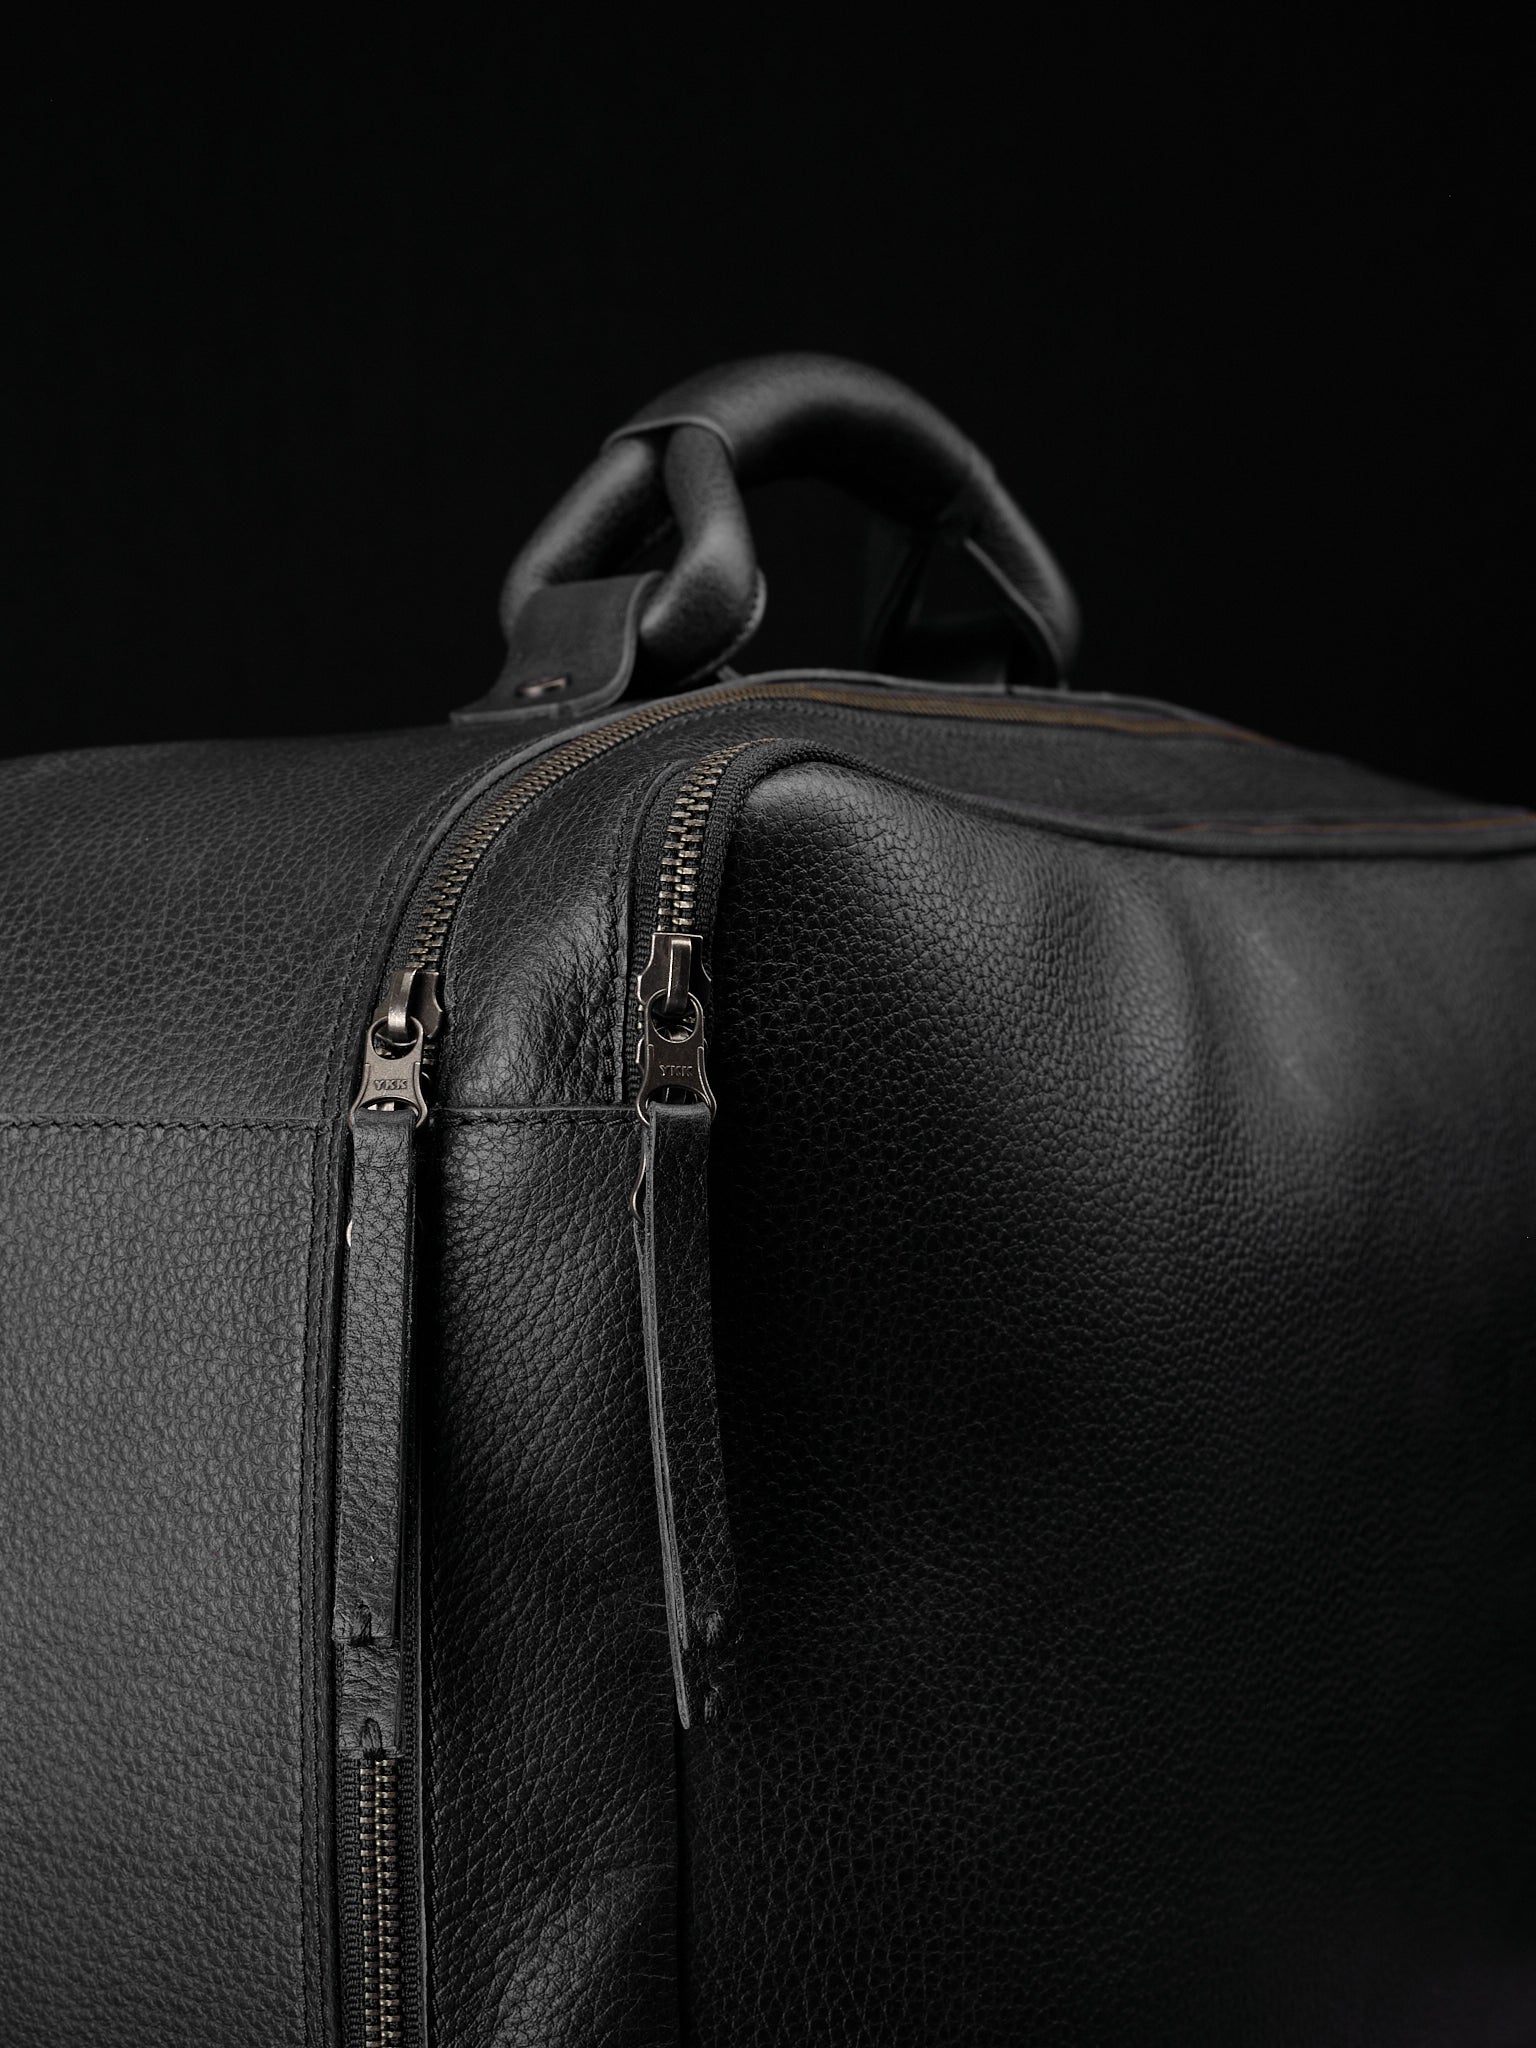 Hand-stitched Pull Tabs. Mens Weekender Bag Black by Capra Leather